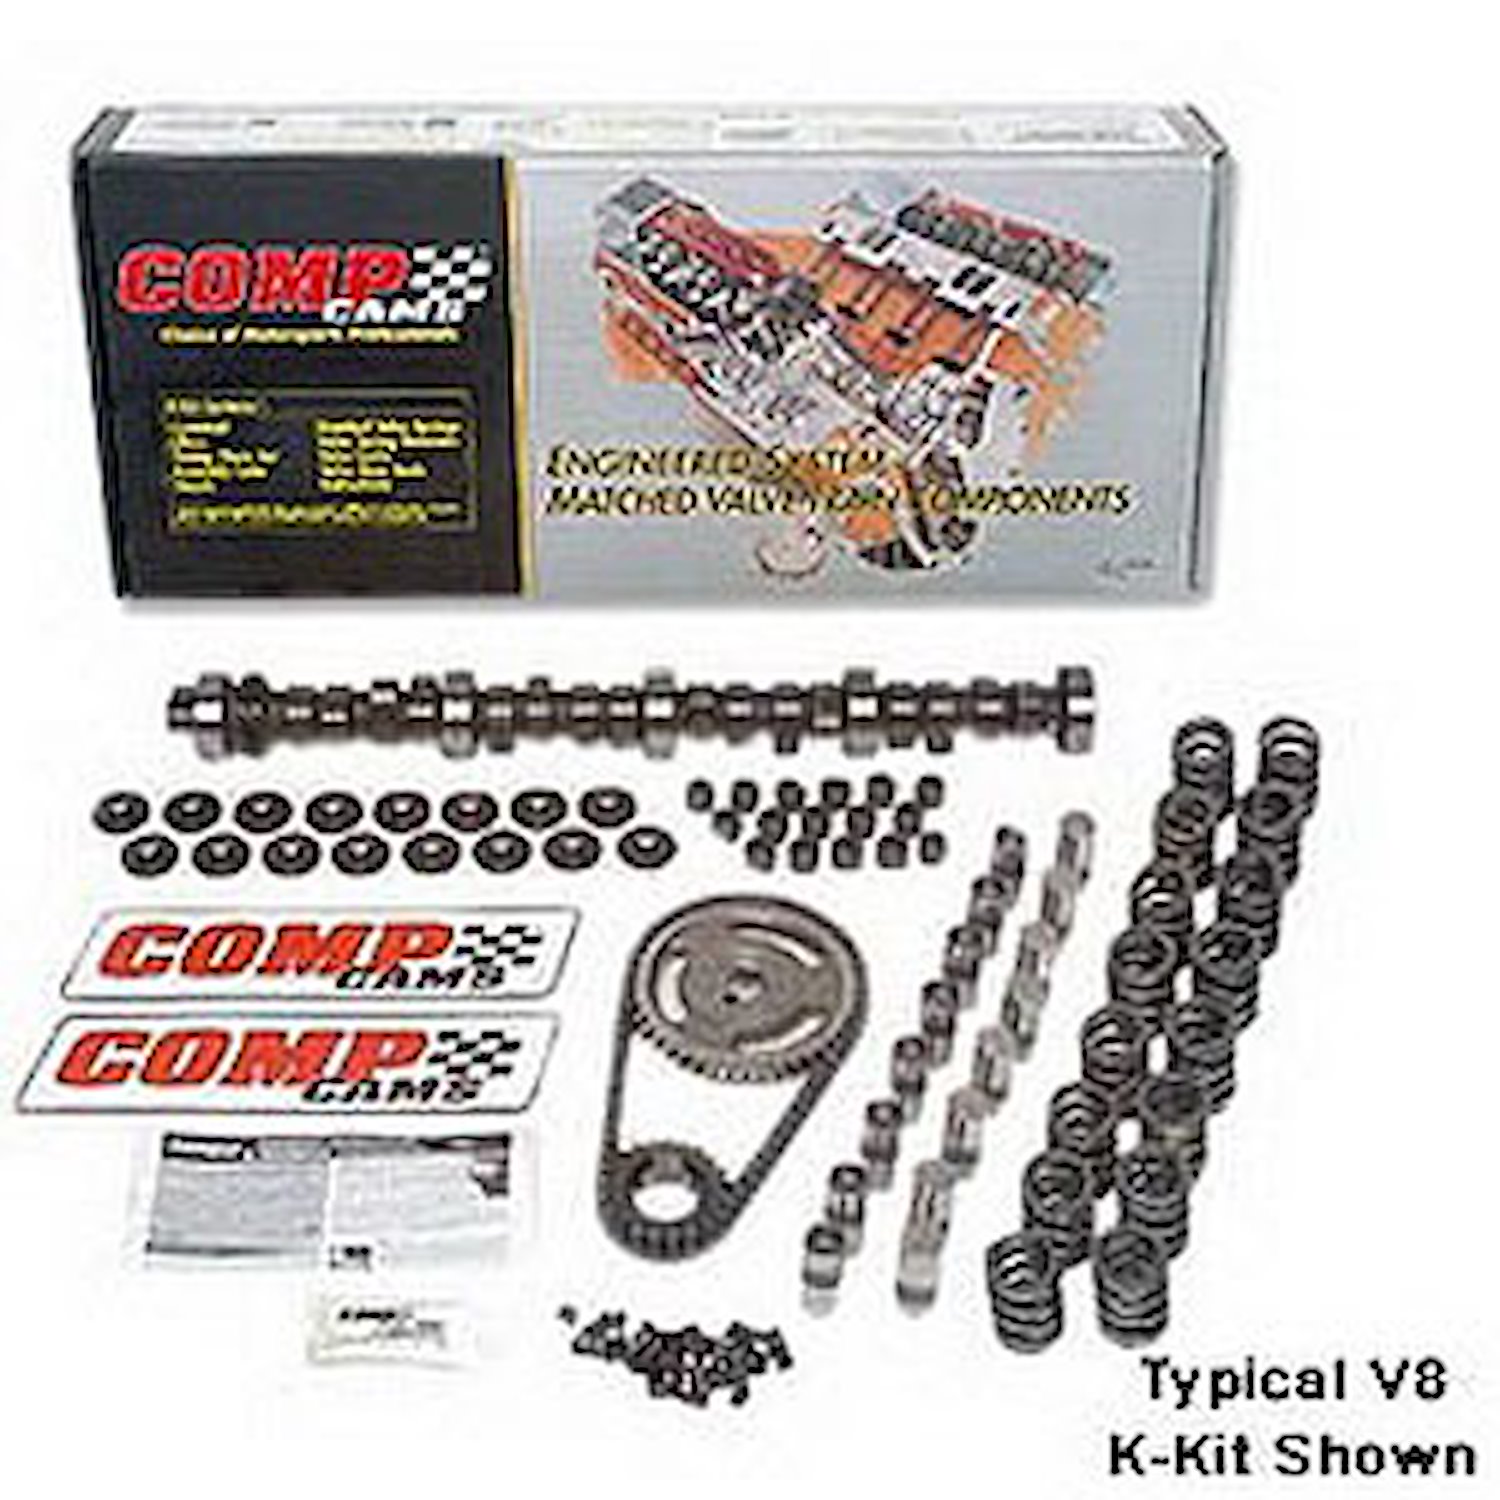 Xtreme Energy 240H Hydraulic Flat Tappet Camshaft Complete Kit Lift .390"/.390" Duration 240/248 RPM Range 500-4500